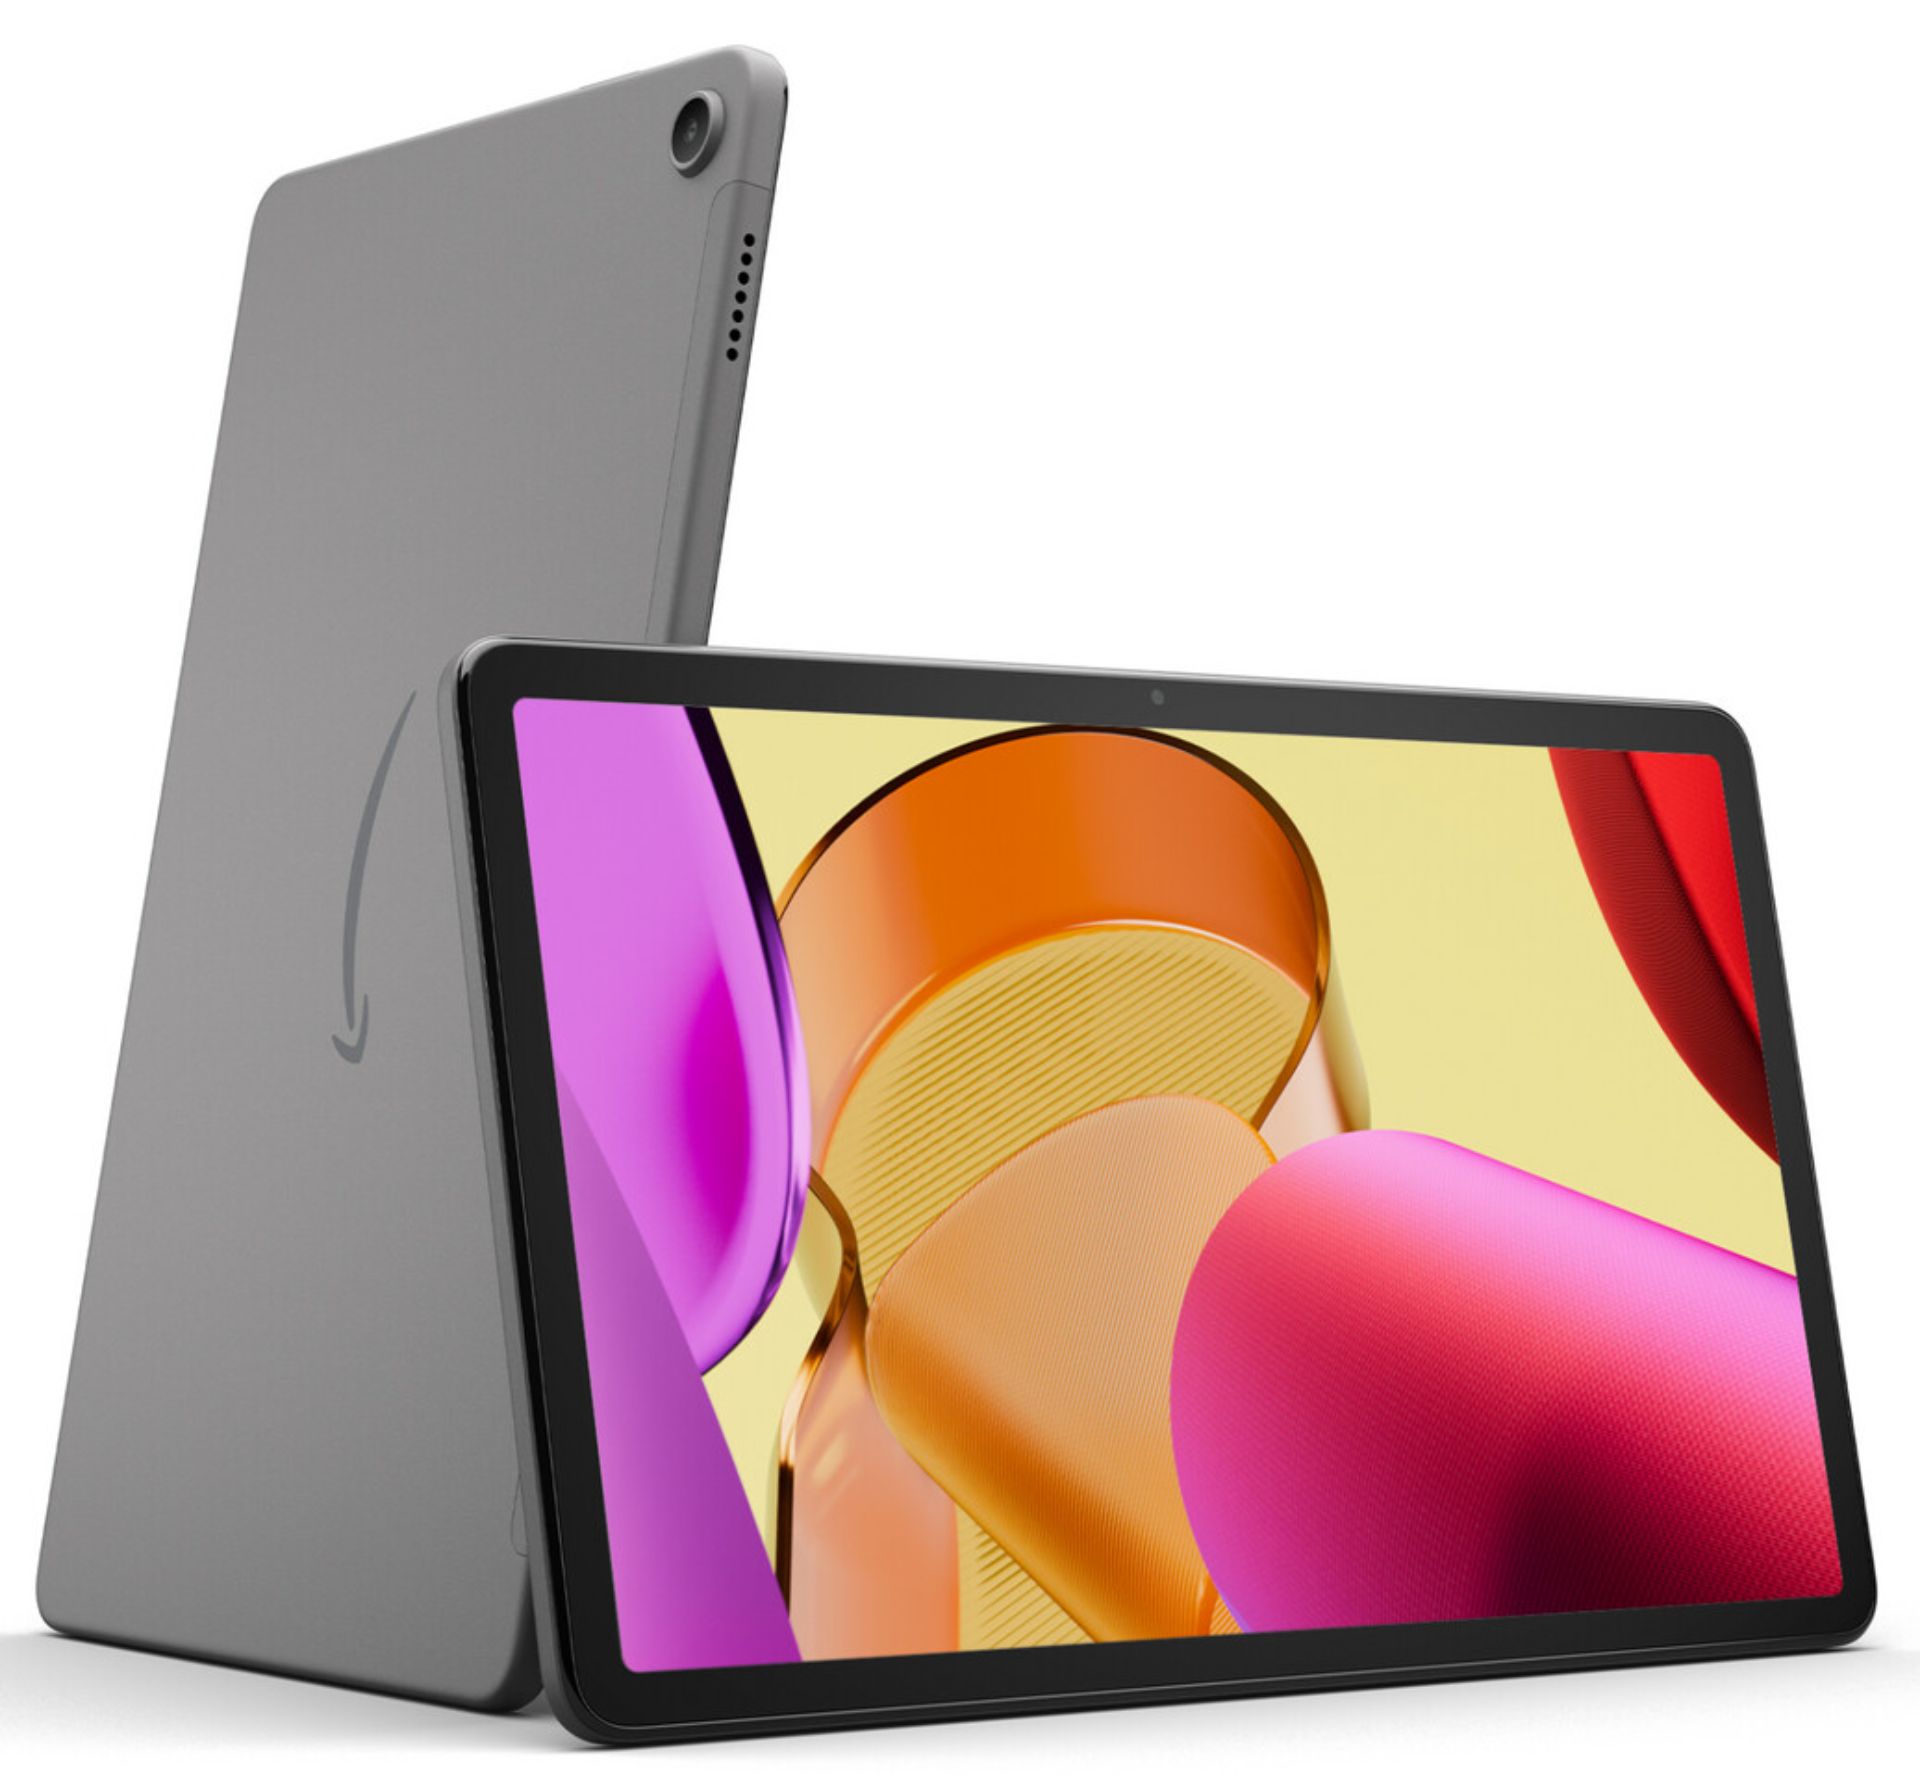 Amazon Launches Fire Max 11 Tablet, The Biggest and Most Powerful